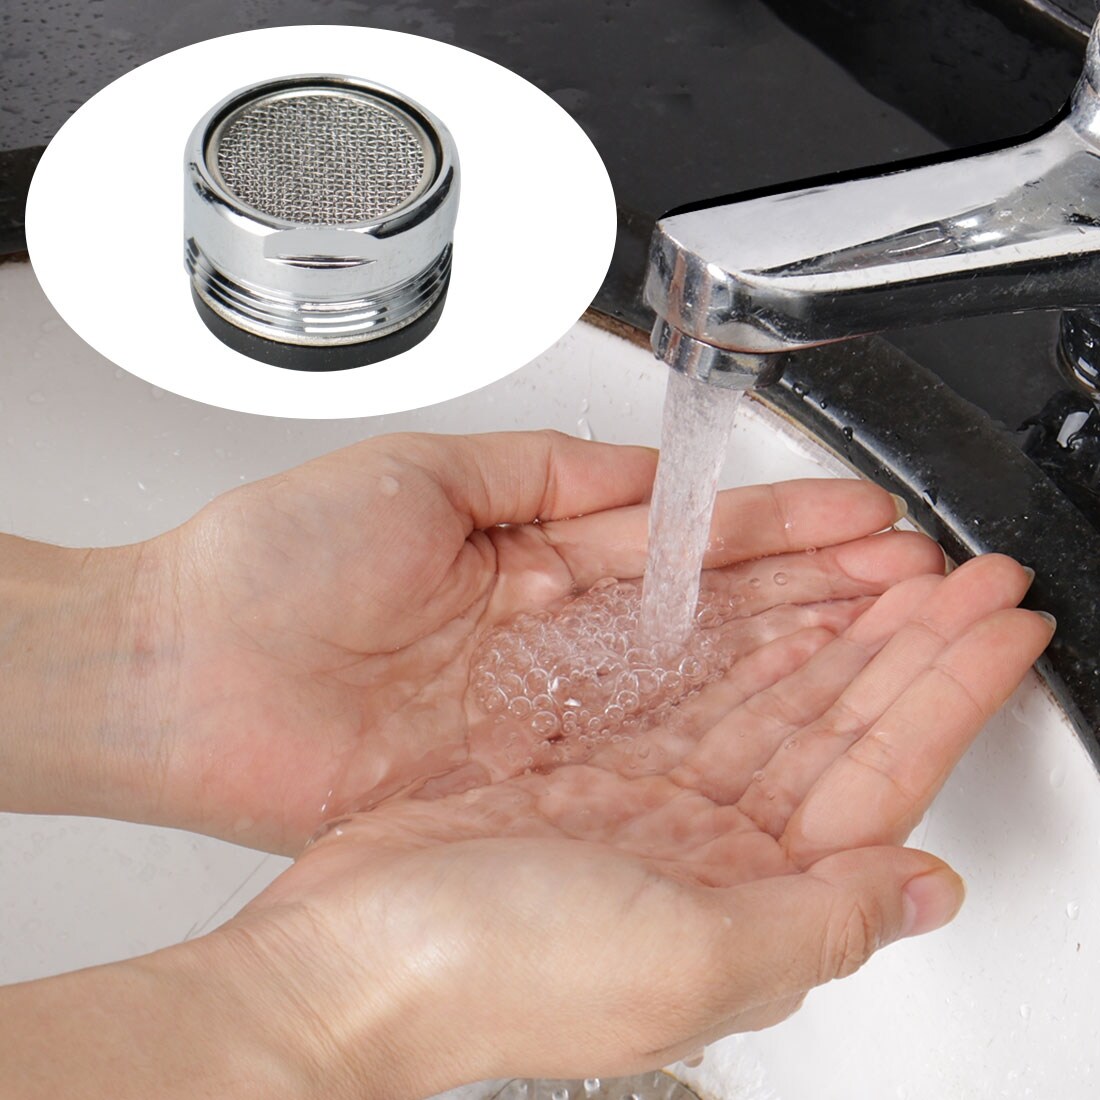 6pcs 22mm Universal Male Faucet Aerator Replacement Water Filter - Silver Tone - 22mm Male 6pcs